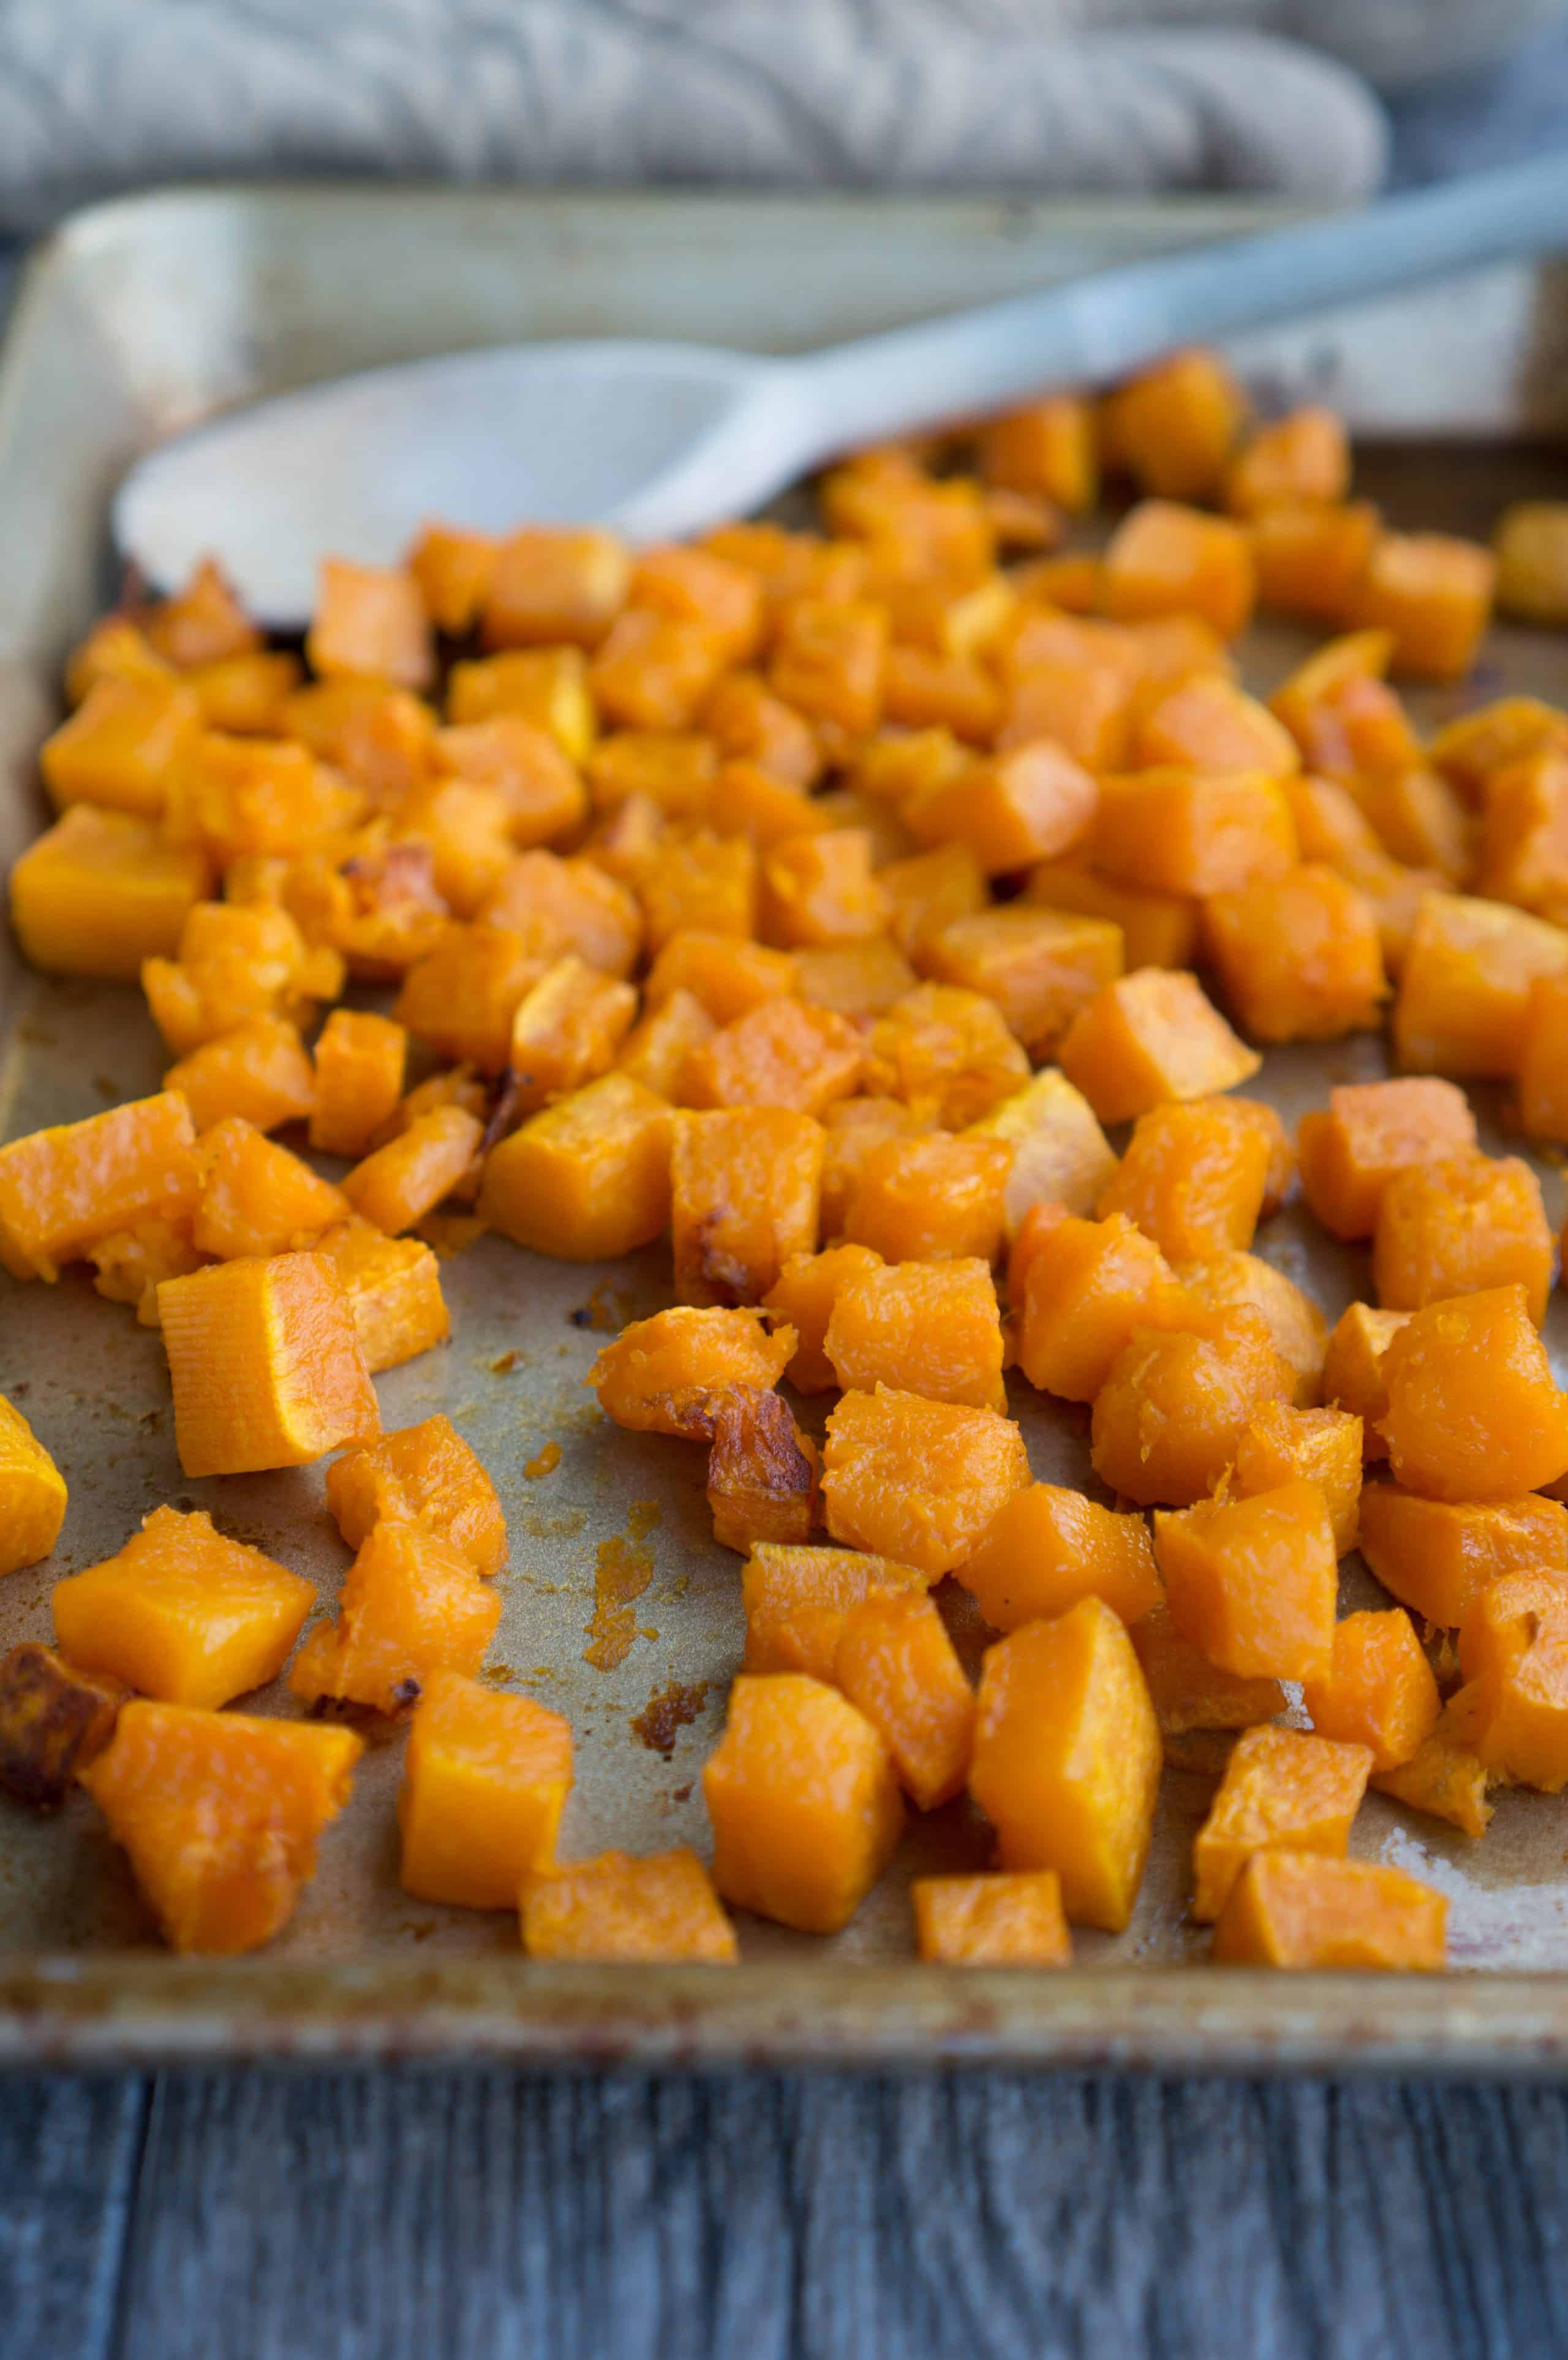 Simple Roasted Butternut Squash – We love this easy vegetarian recipe for Simple Roasted Butternut Squash! ♥ This 3-ingredient recipe uses chopped butternut squash, extra virgin olive oil, and salt. Nutrient-packed, velvety, roasted squash makes your weekly meal prep & healthy eating a breeze! | freeyourfork.com